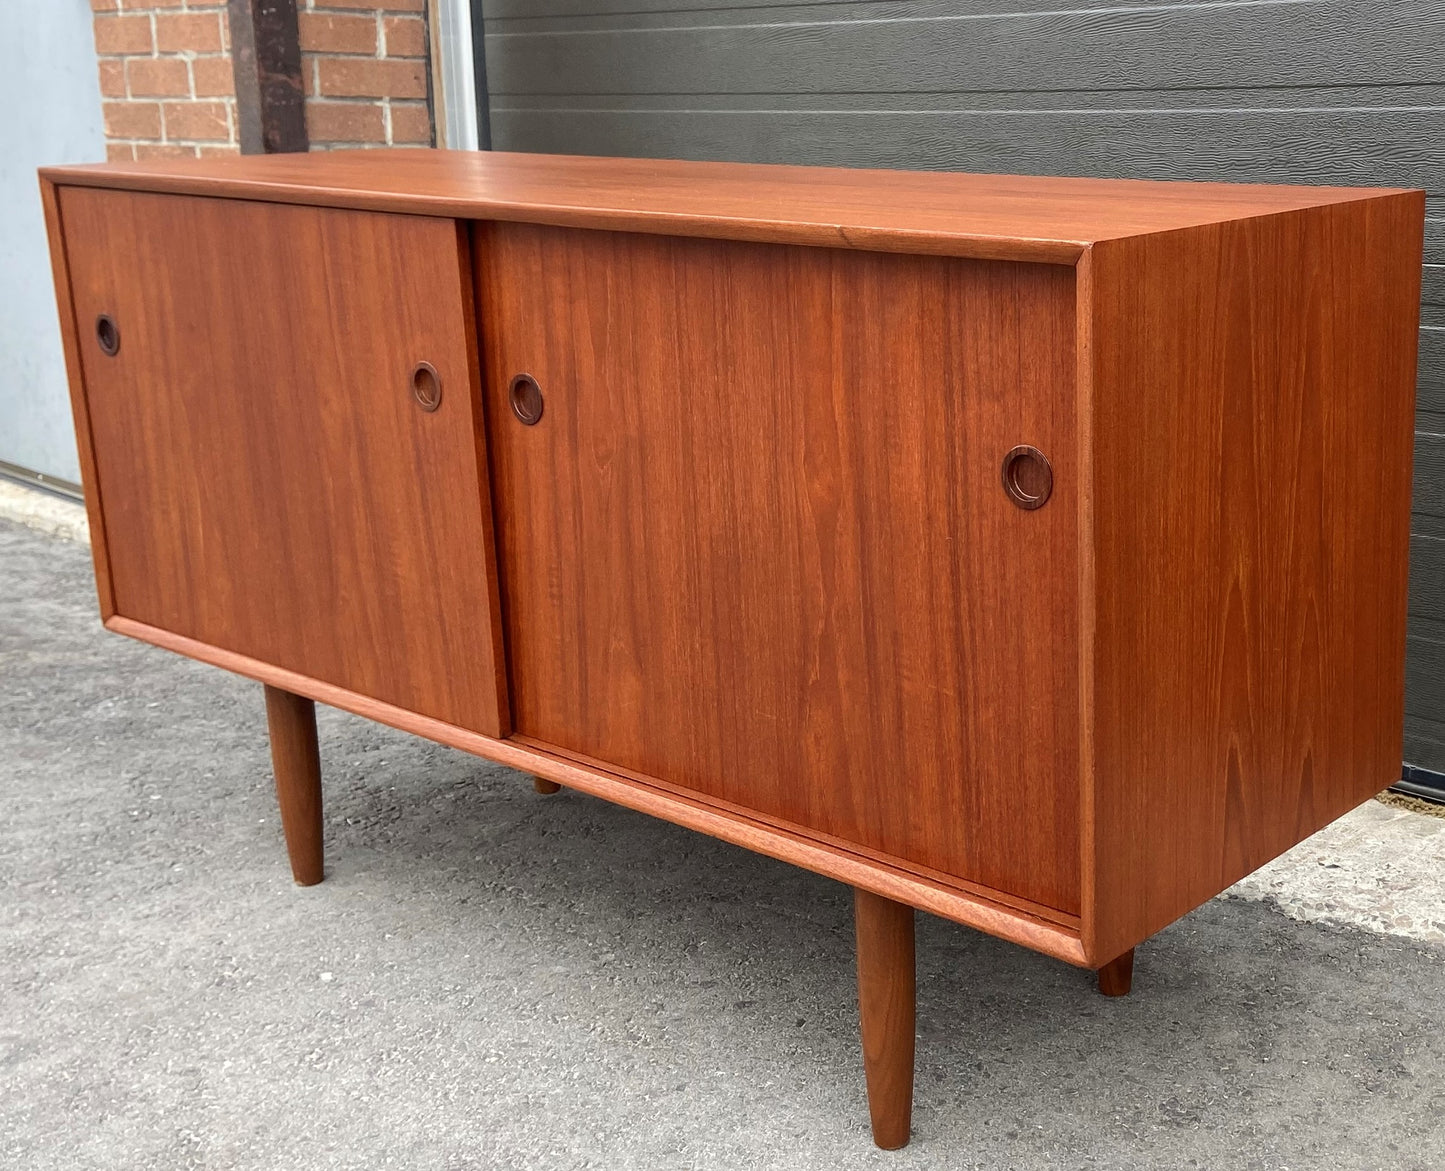 REFINISHE MCM Teak Sideboard by Punch 54", Perfect